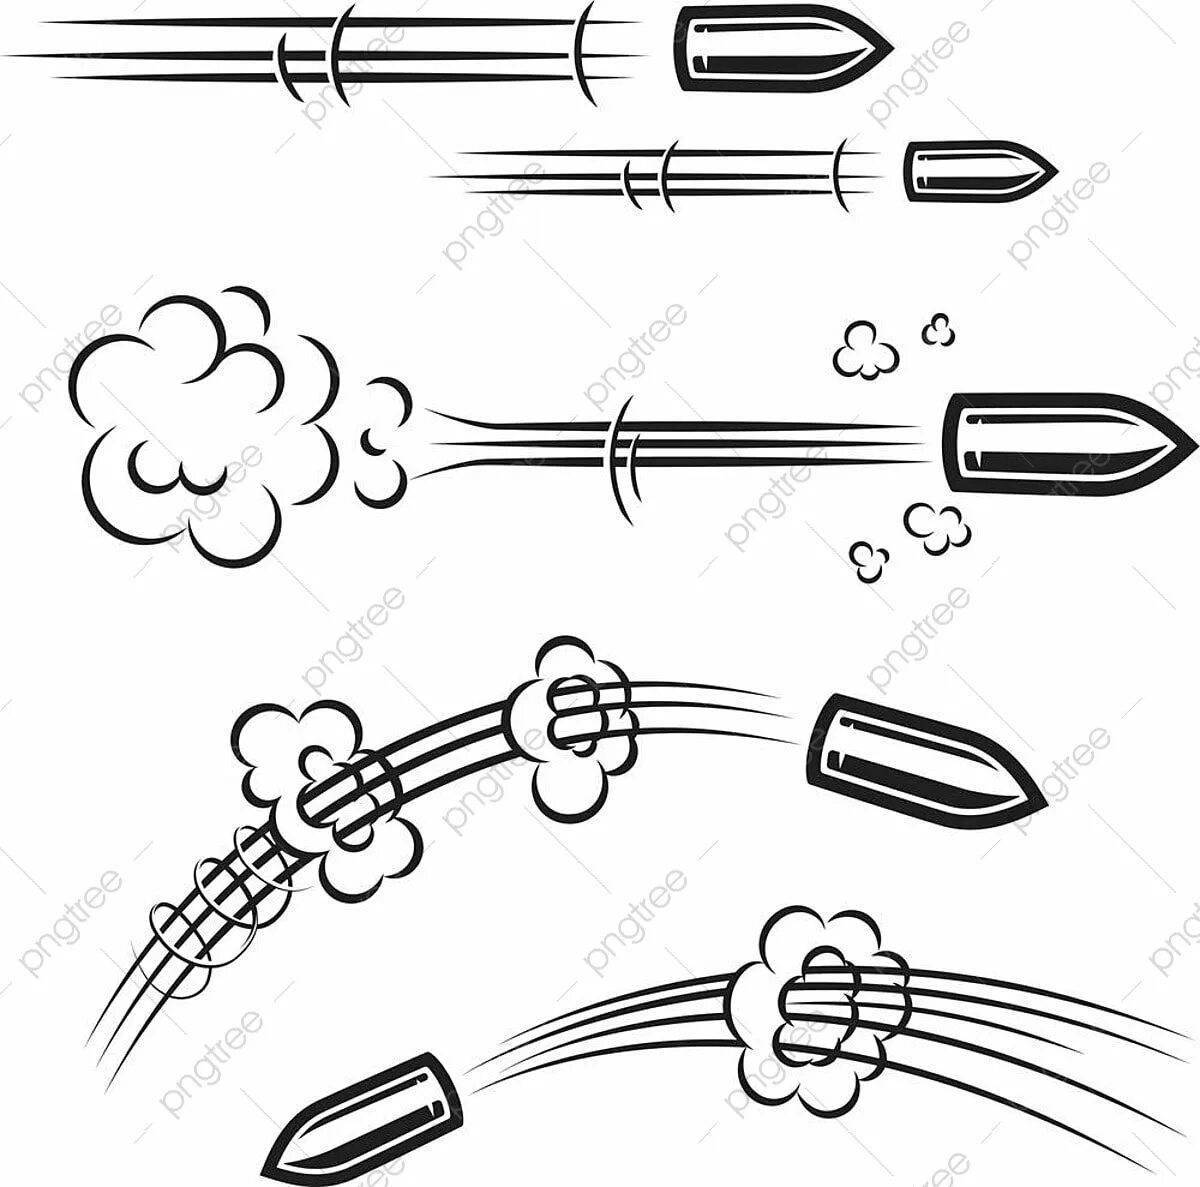 Glowing bullet coloring page